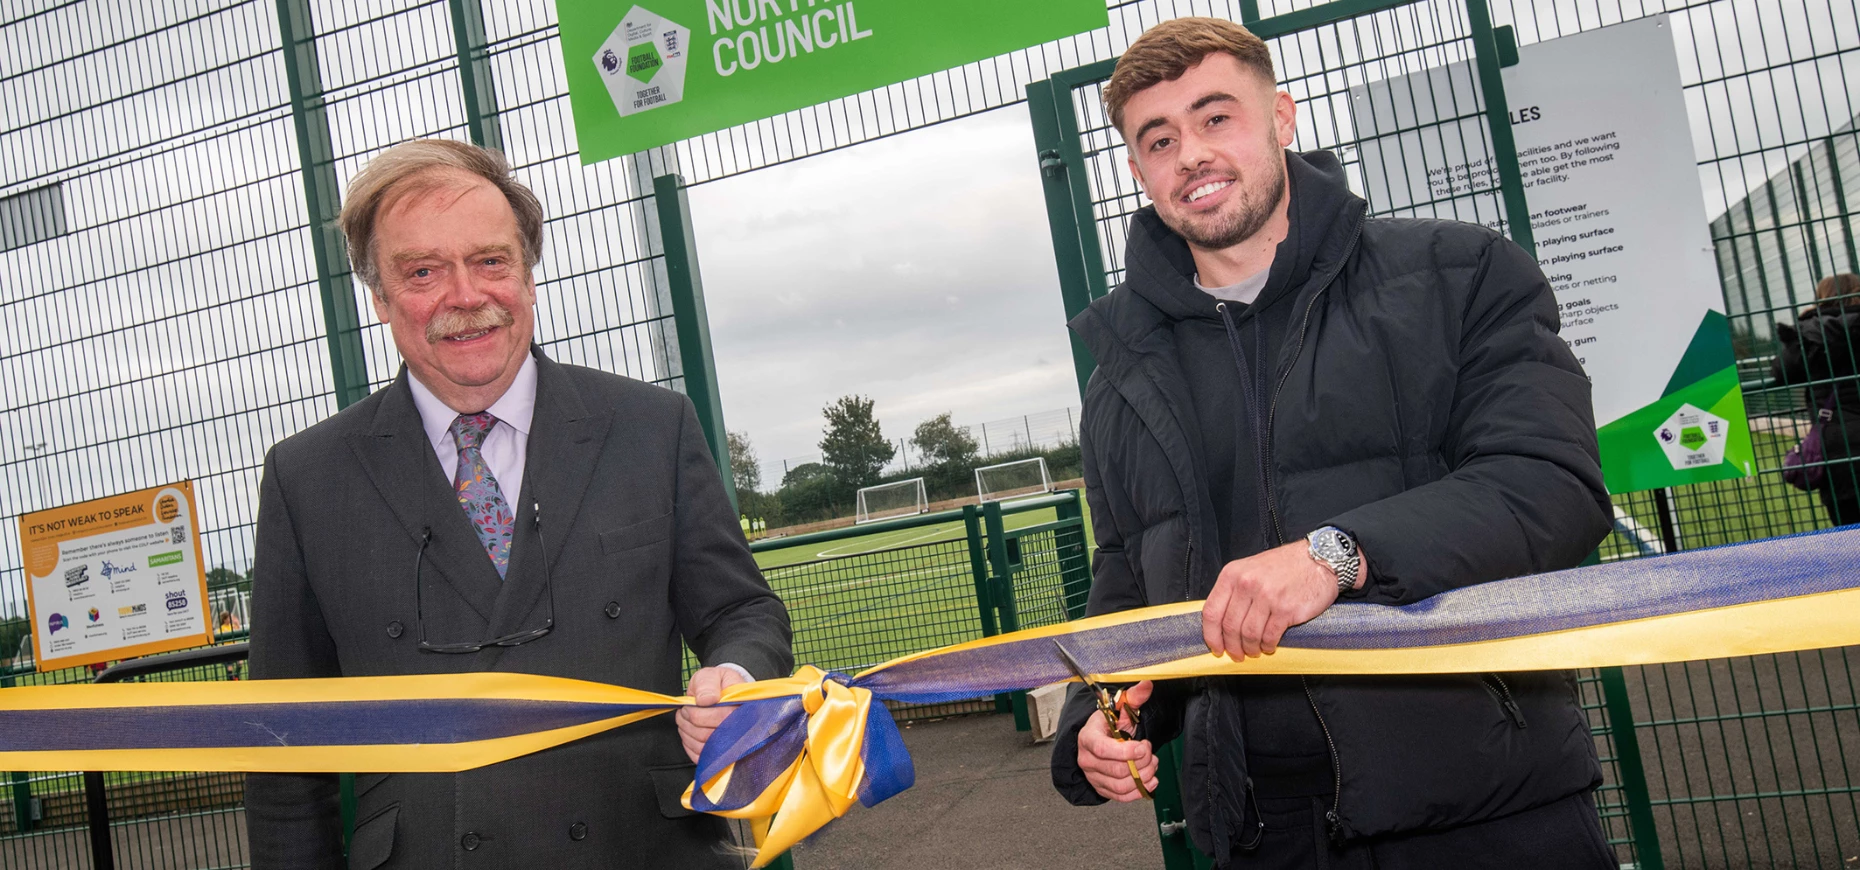 Councillor Simon Myers and professional footballer Alfie McCalmont cut the ribbon to officially open the new 3G pitch and pavilion in Sowerby.